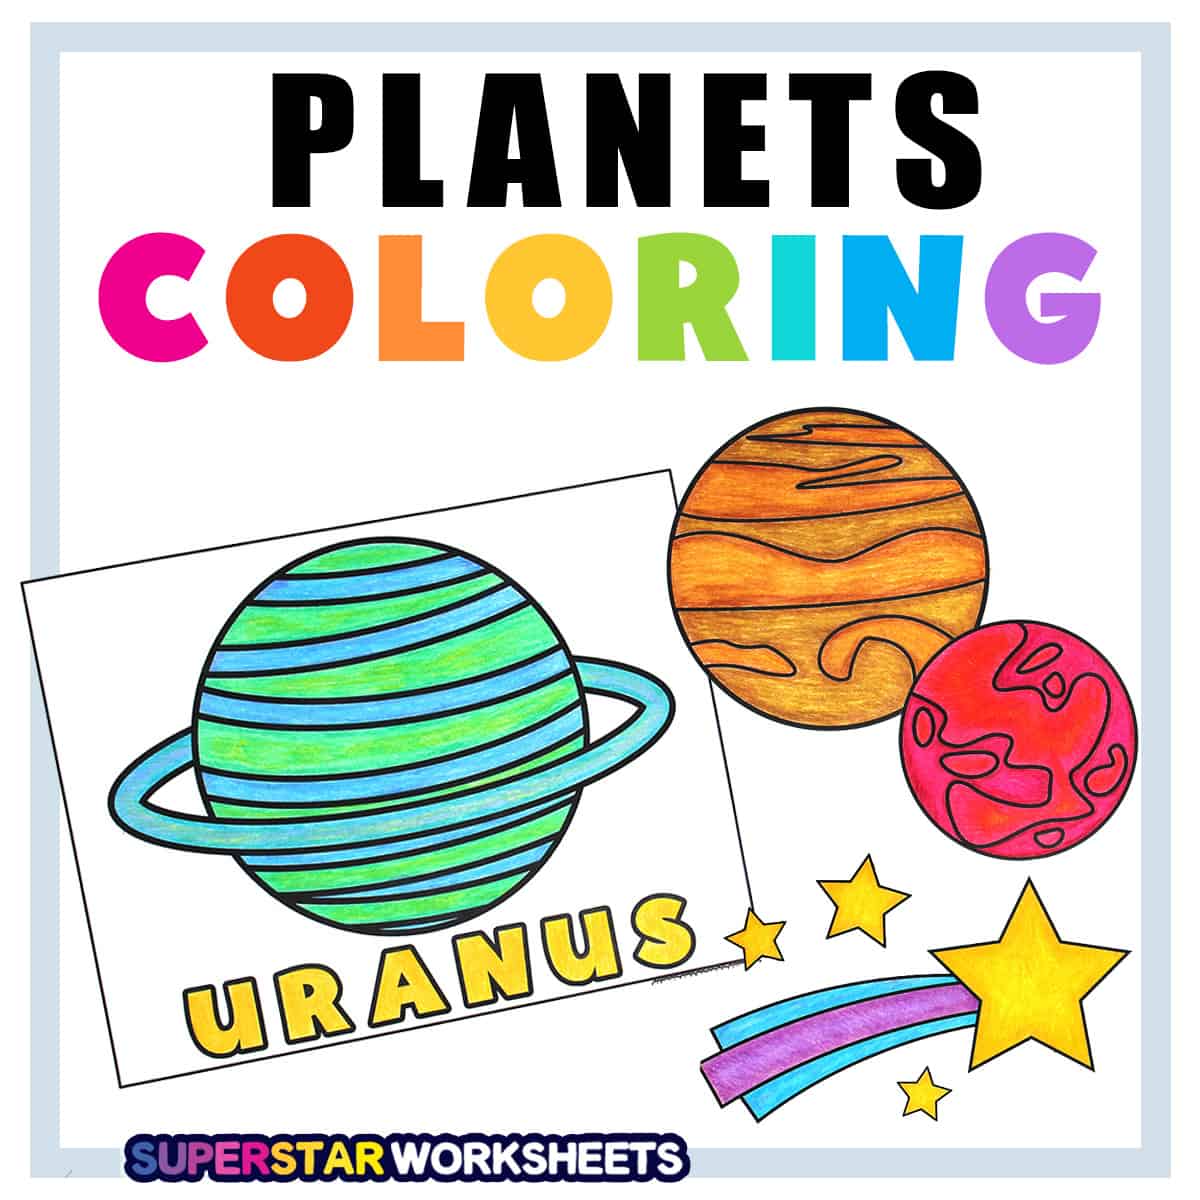 Free Printable Coloring Pages Solar System